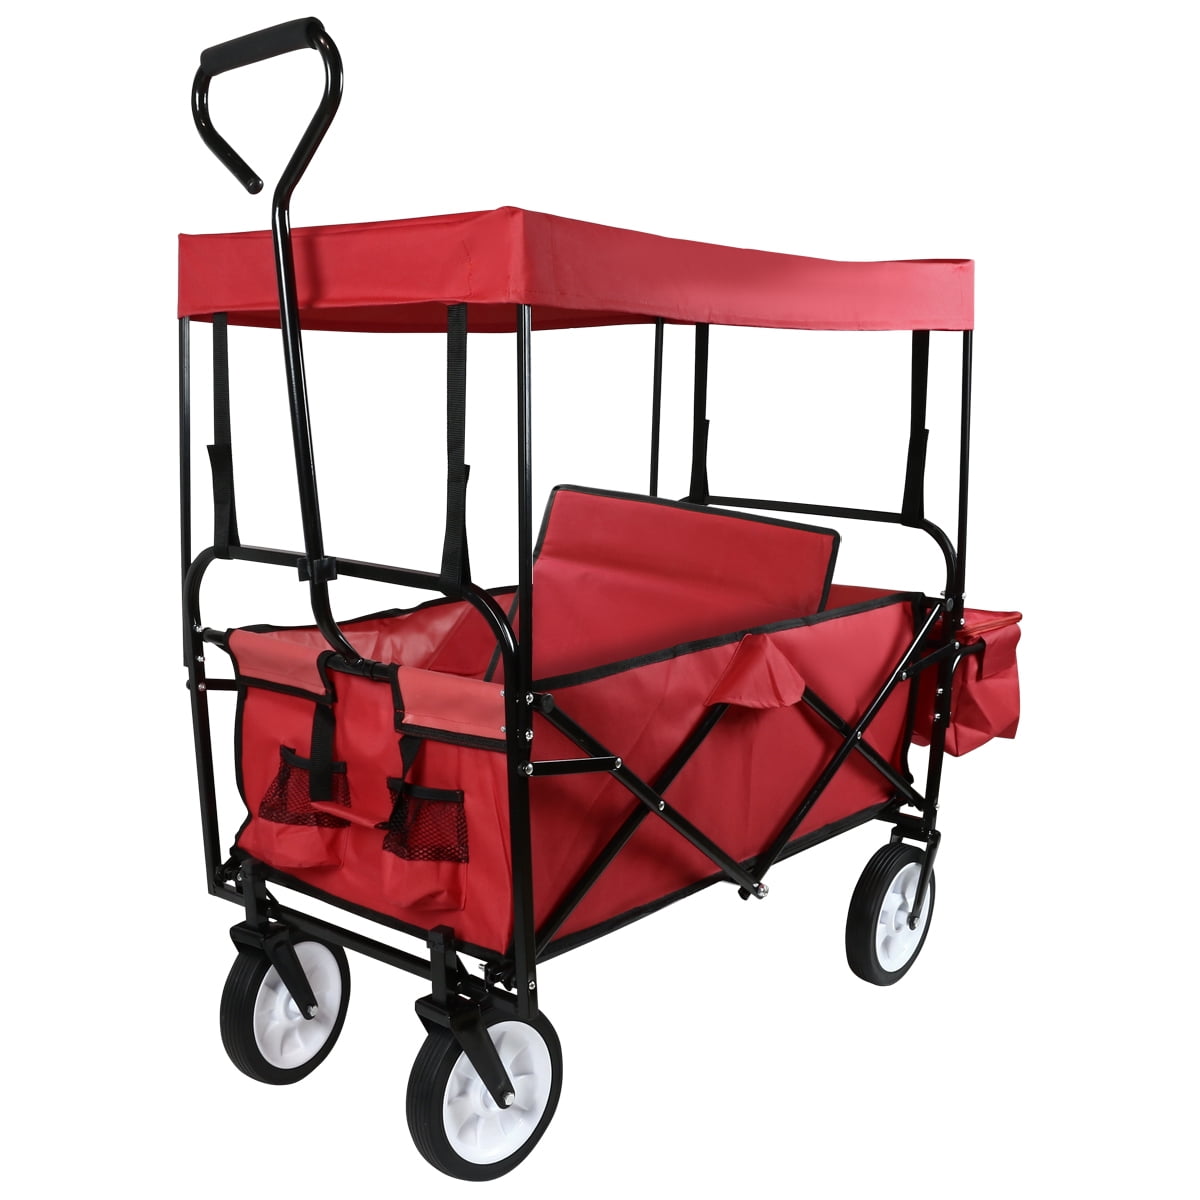 Collapsible Folding Wagon Cart W/ Canopy Outdoor Utility Garden Trolley Buggy